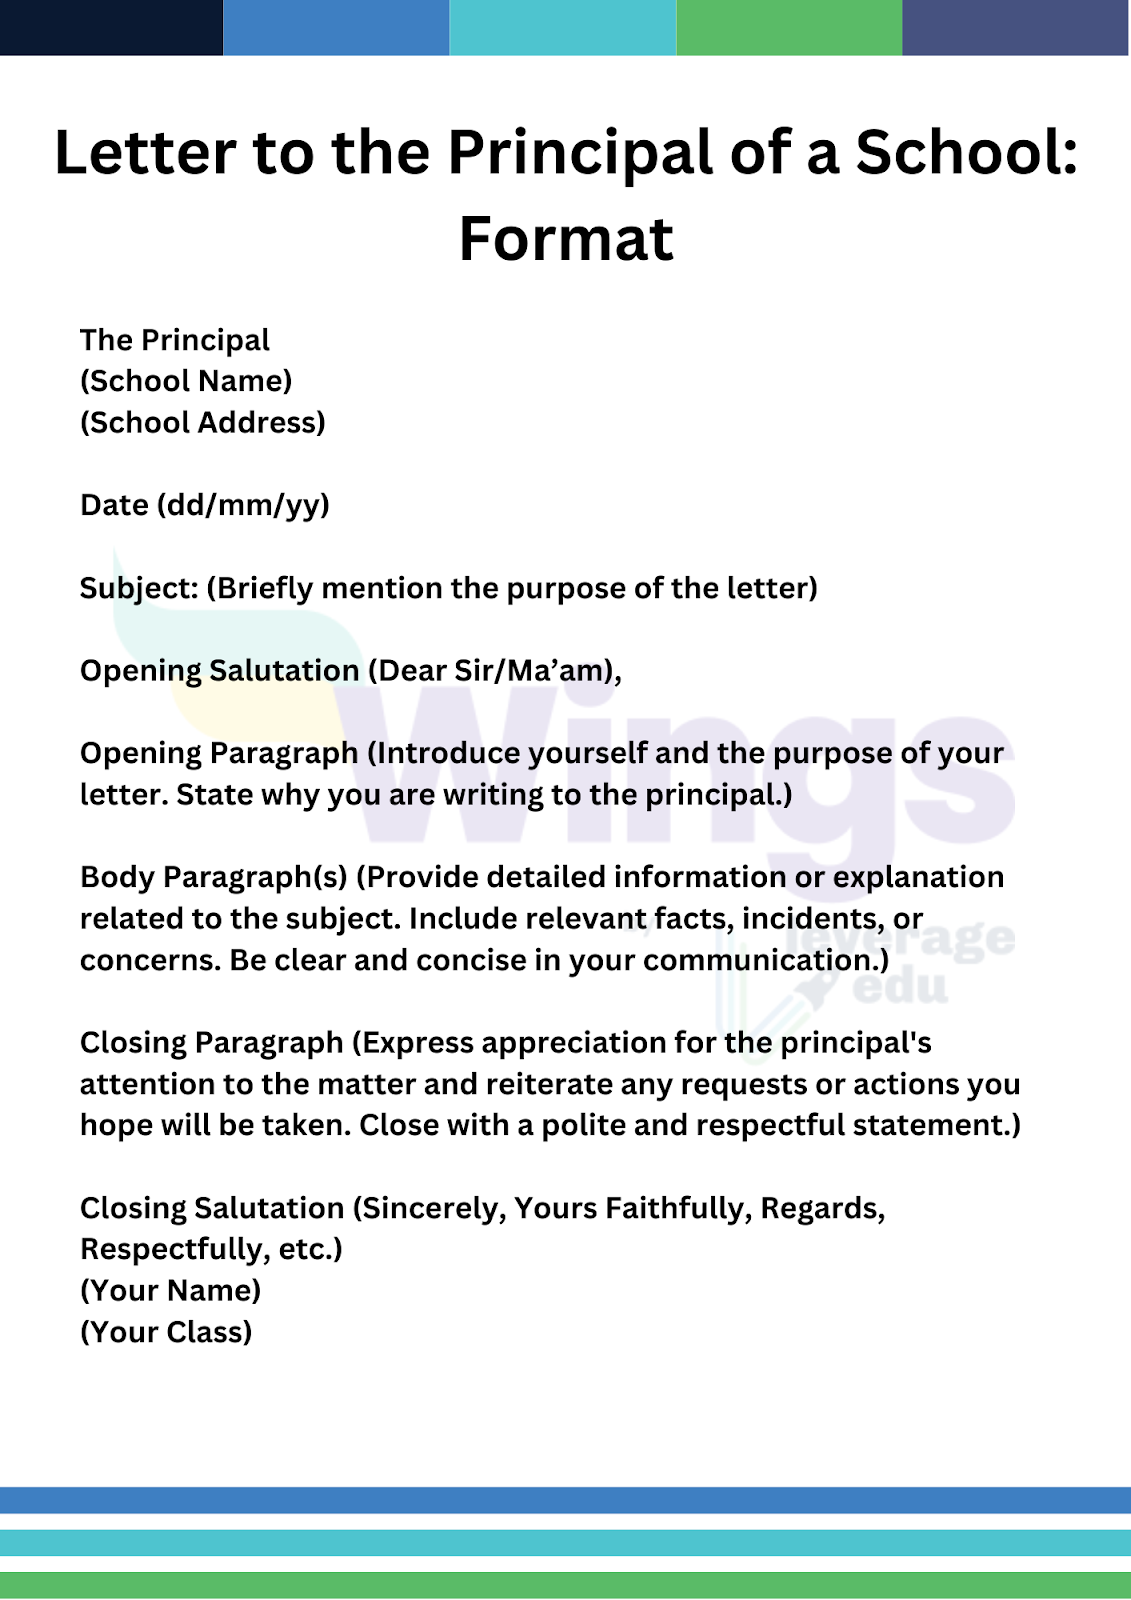 Write a Letter to the Principal Complaining about the Misbehaviour of a Student: Format